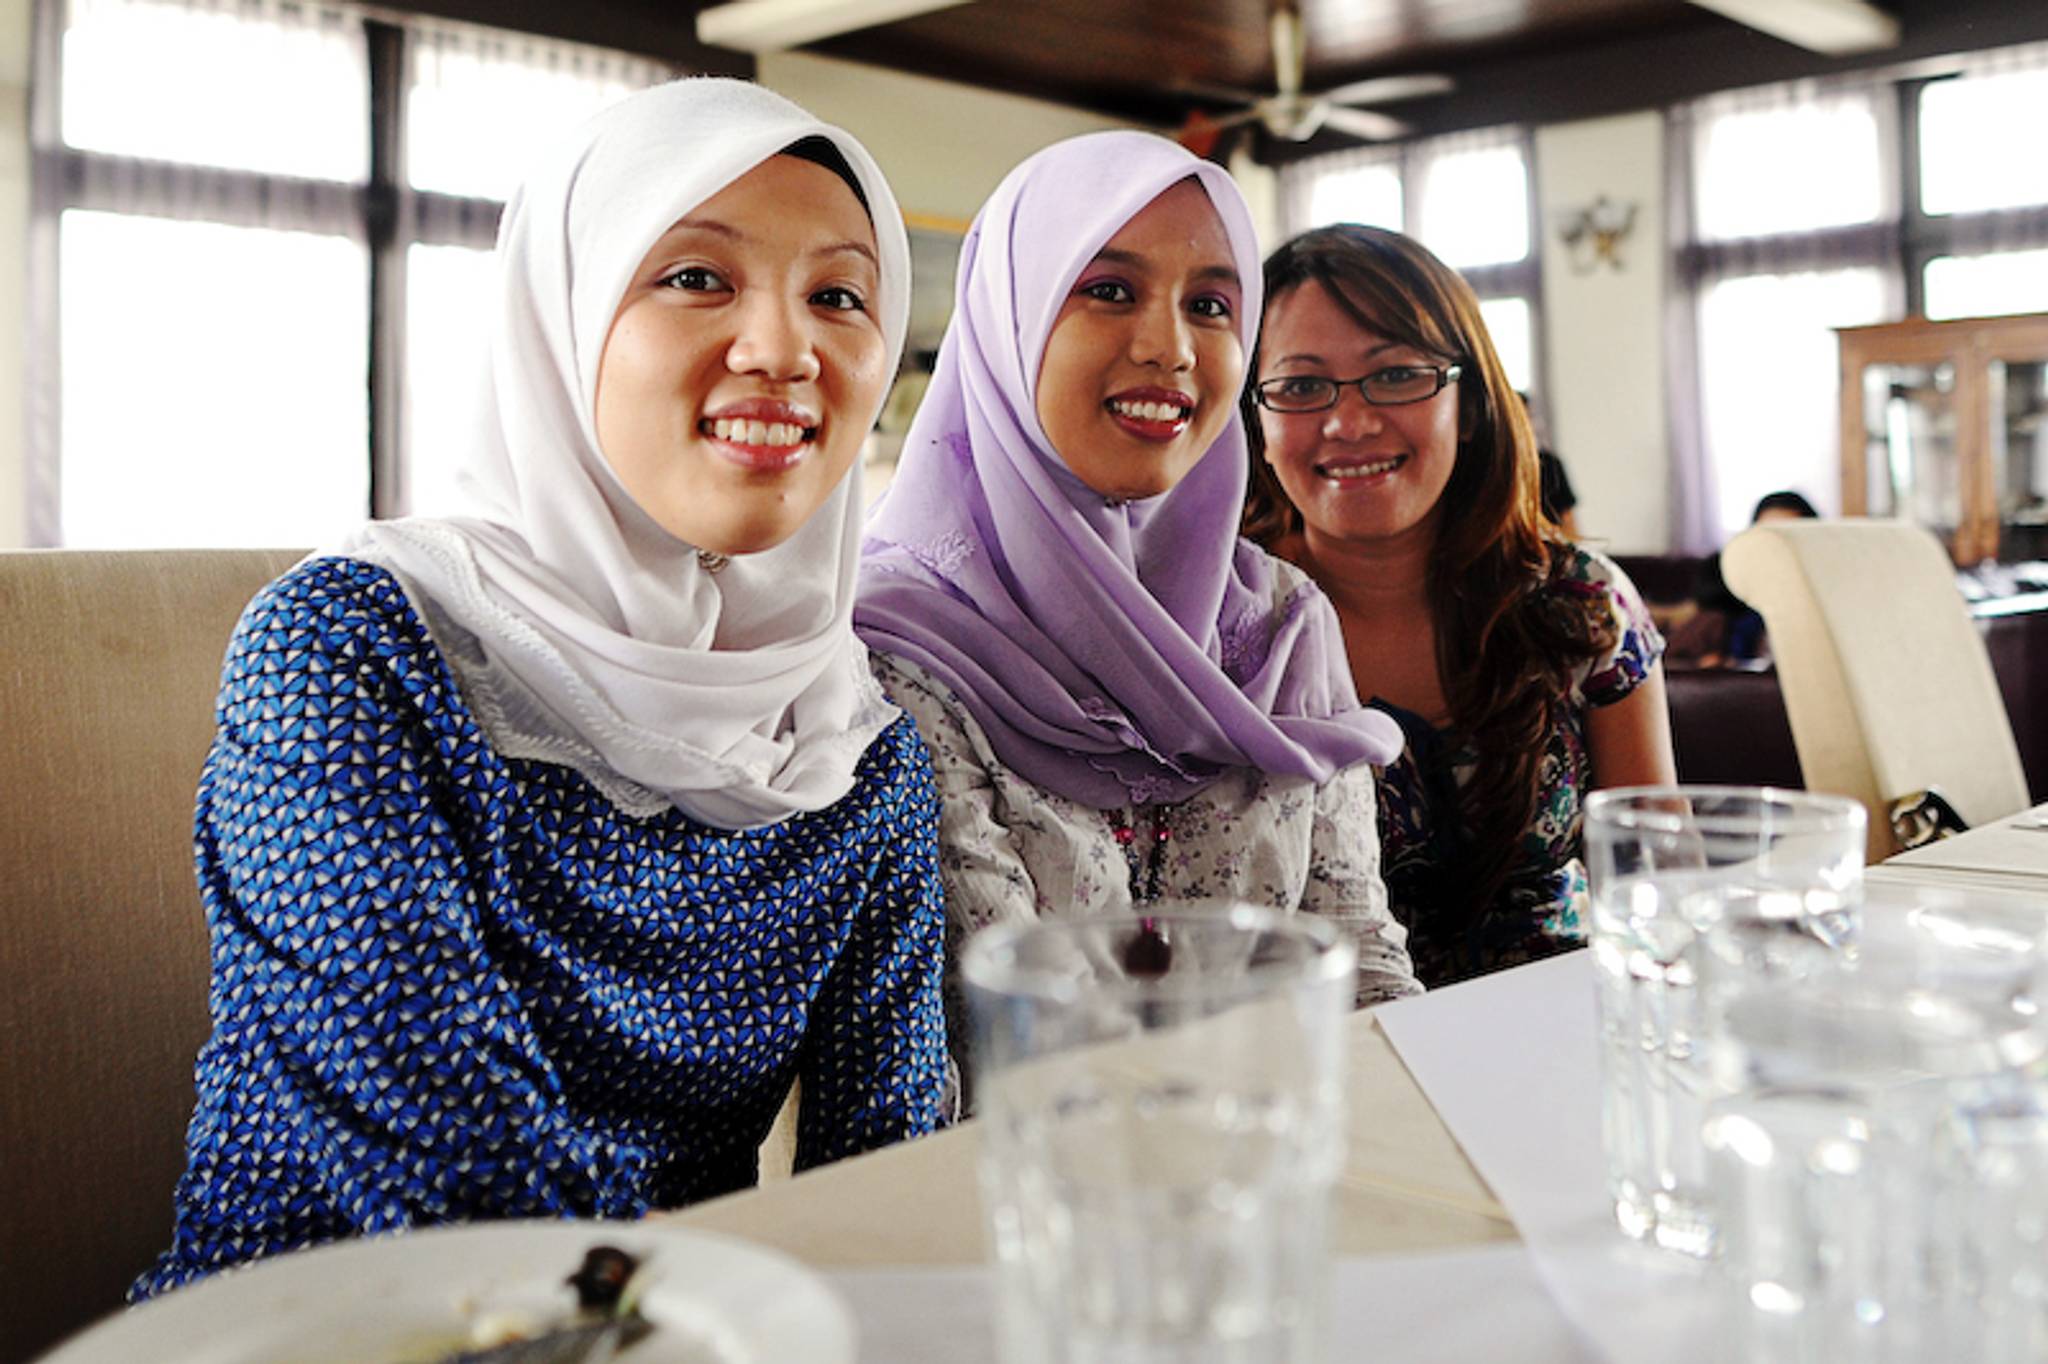 Halal Dining Club helps Muslims find a place to eat